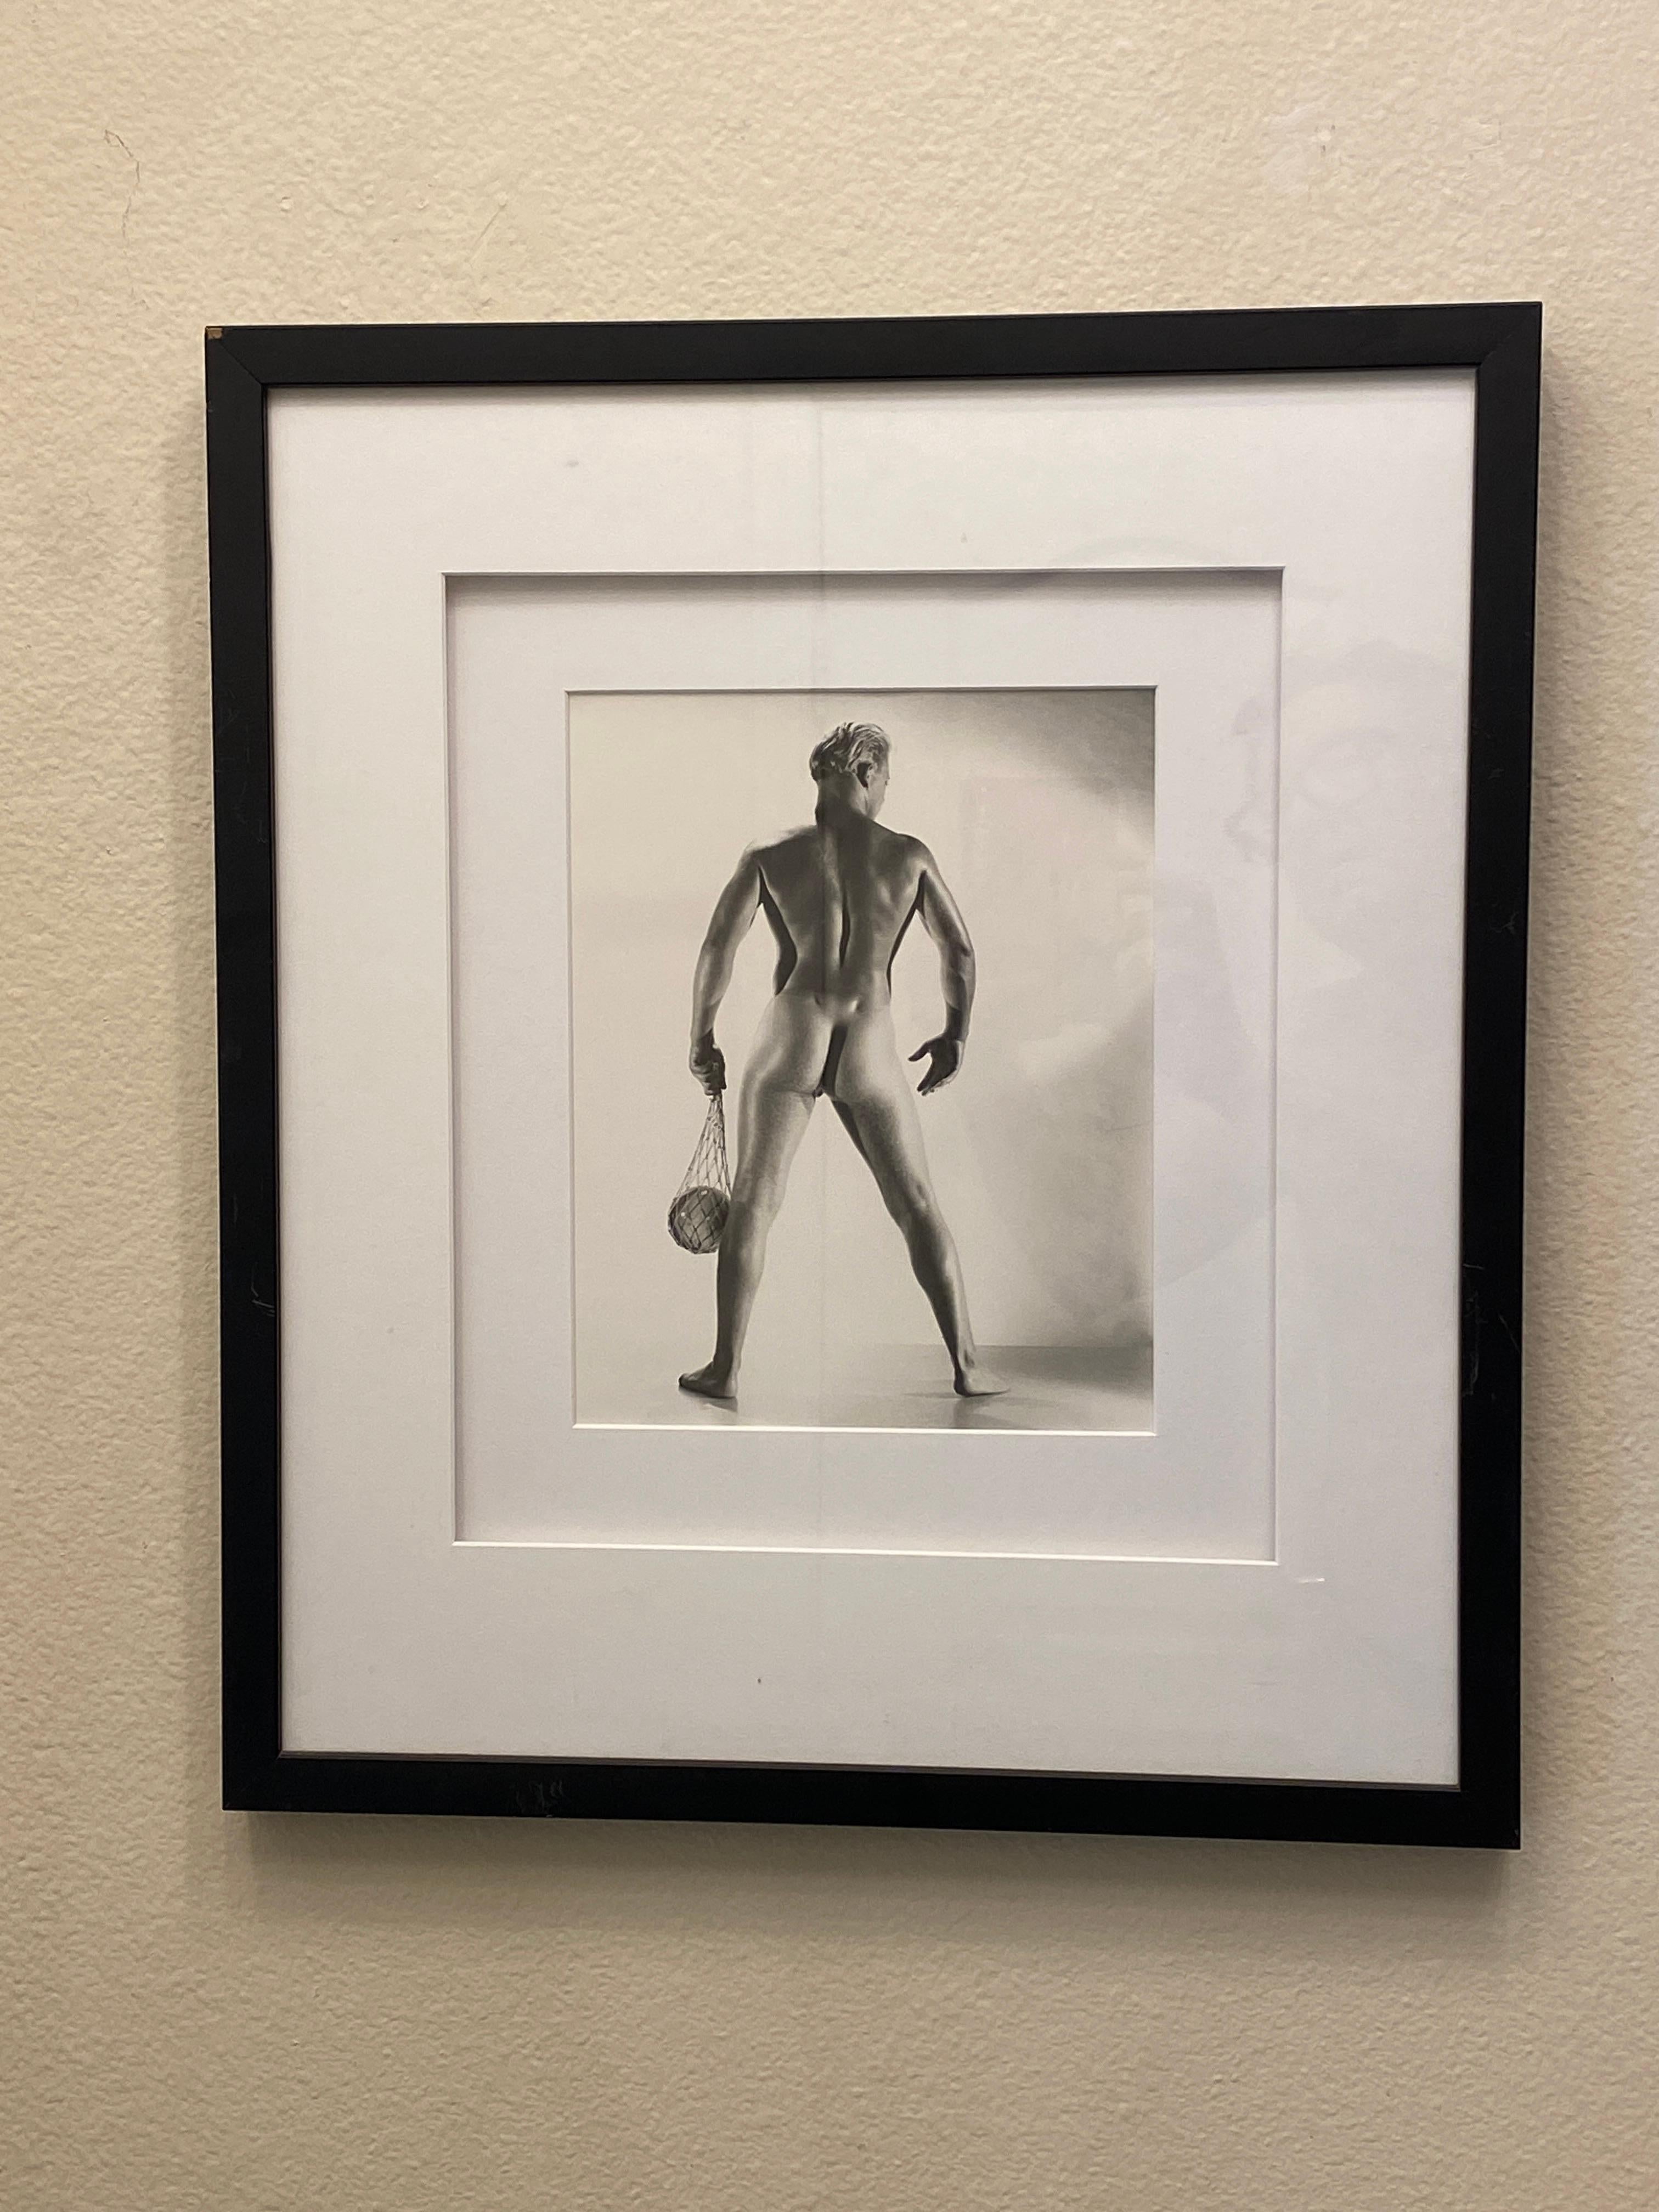 Hand-Crafted Bruce of L.A. (Bruce Bellas) Original 50s Male Nude Photograph Handsome Model For Sale